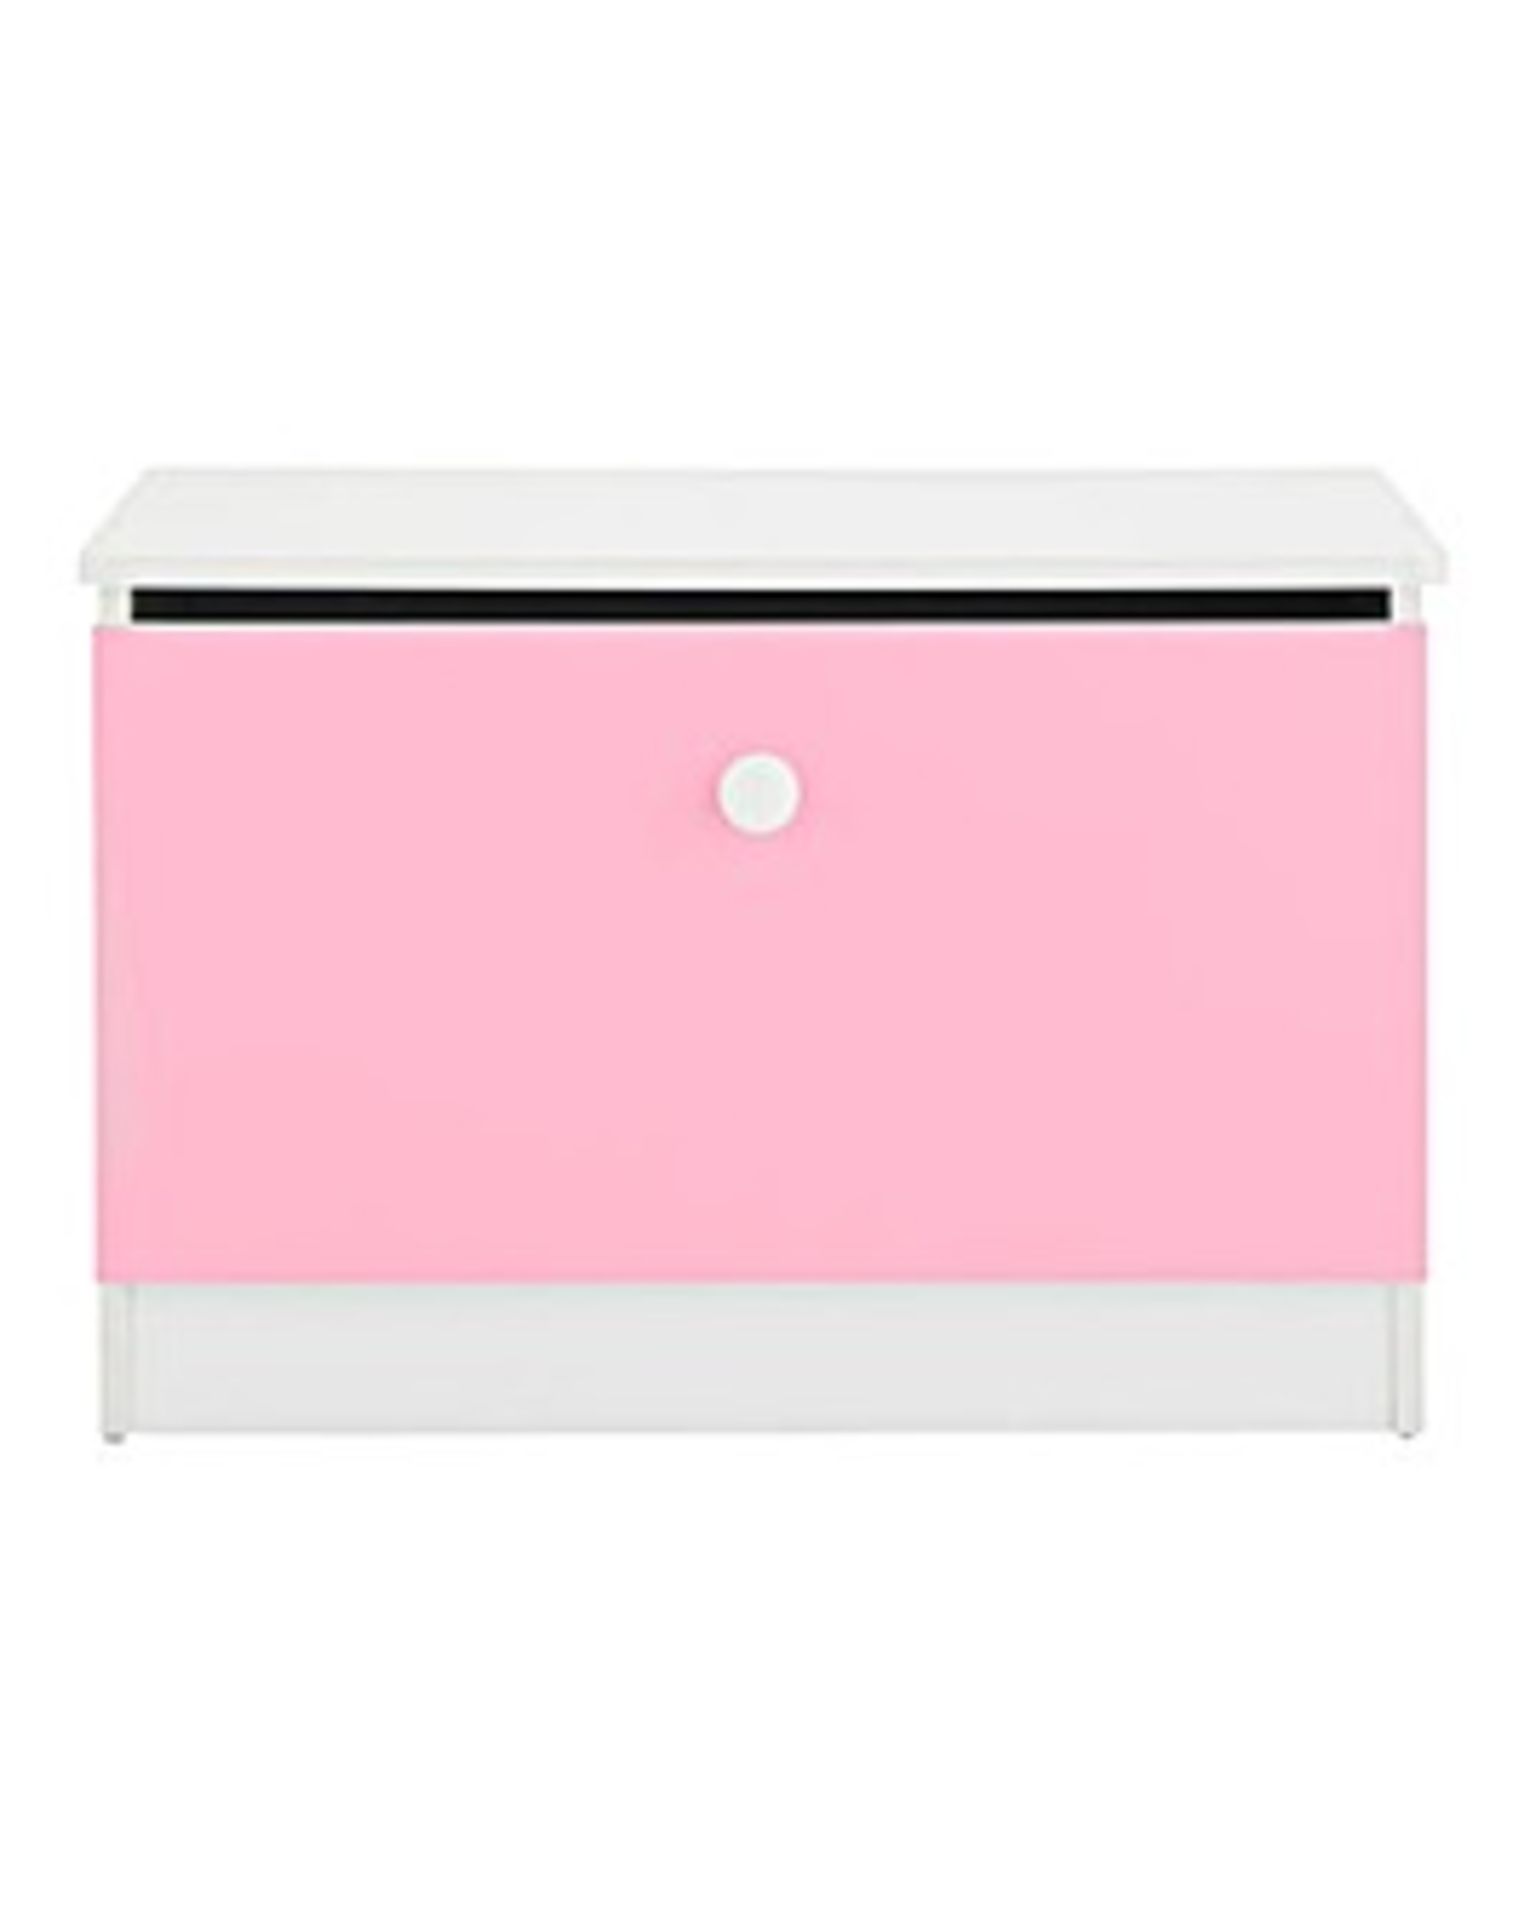 3 X Brand new Florida Ottoman Pink R7.9 The Florida Ottoman is part of the Florida Children's